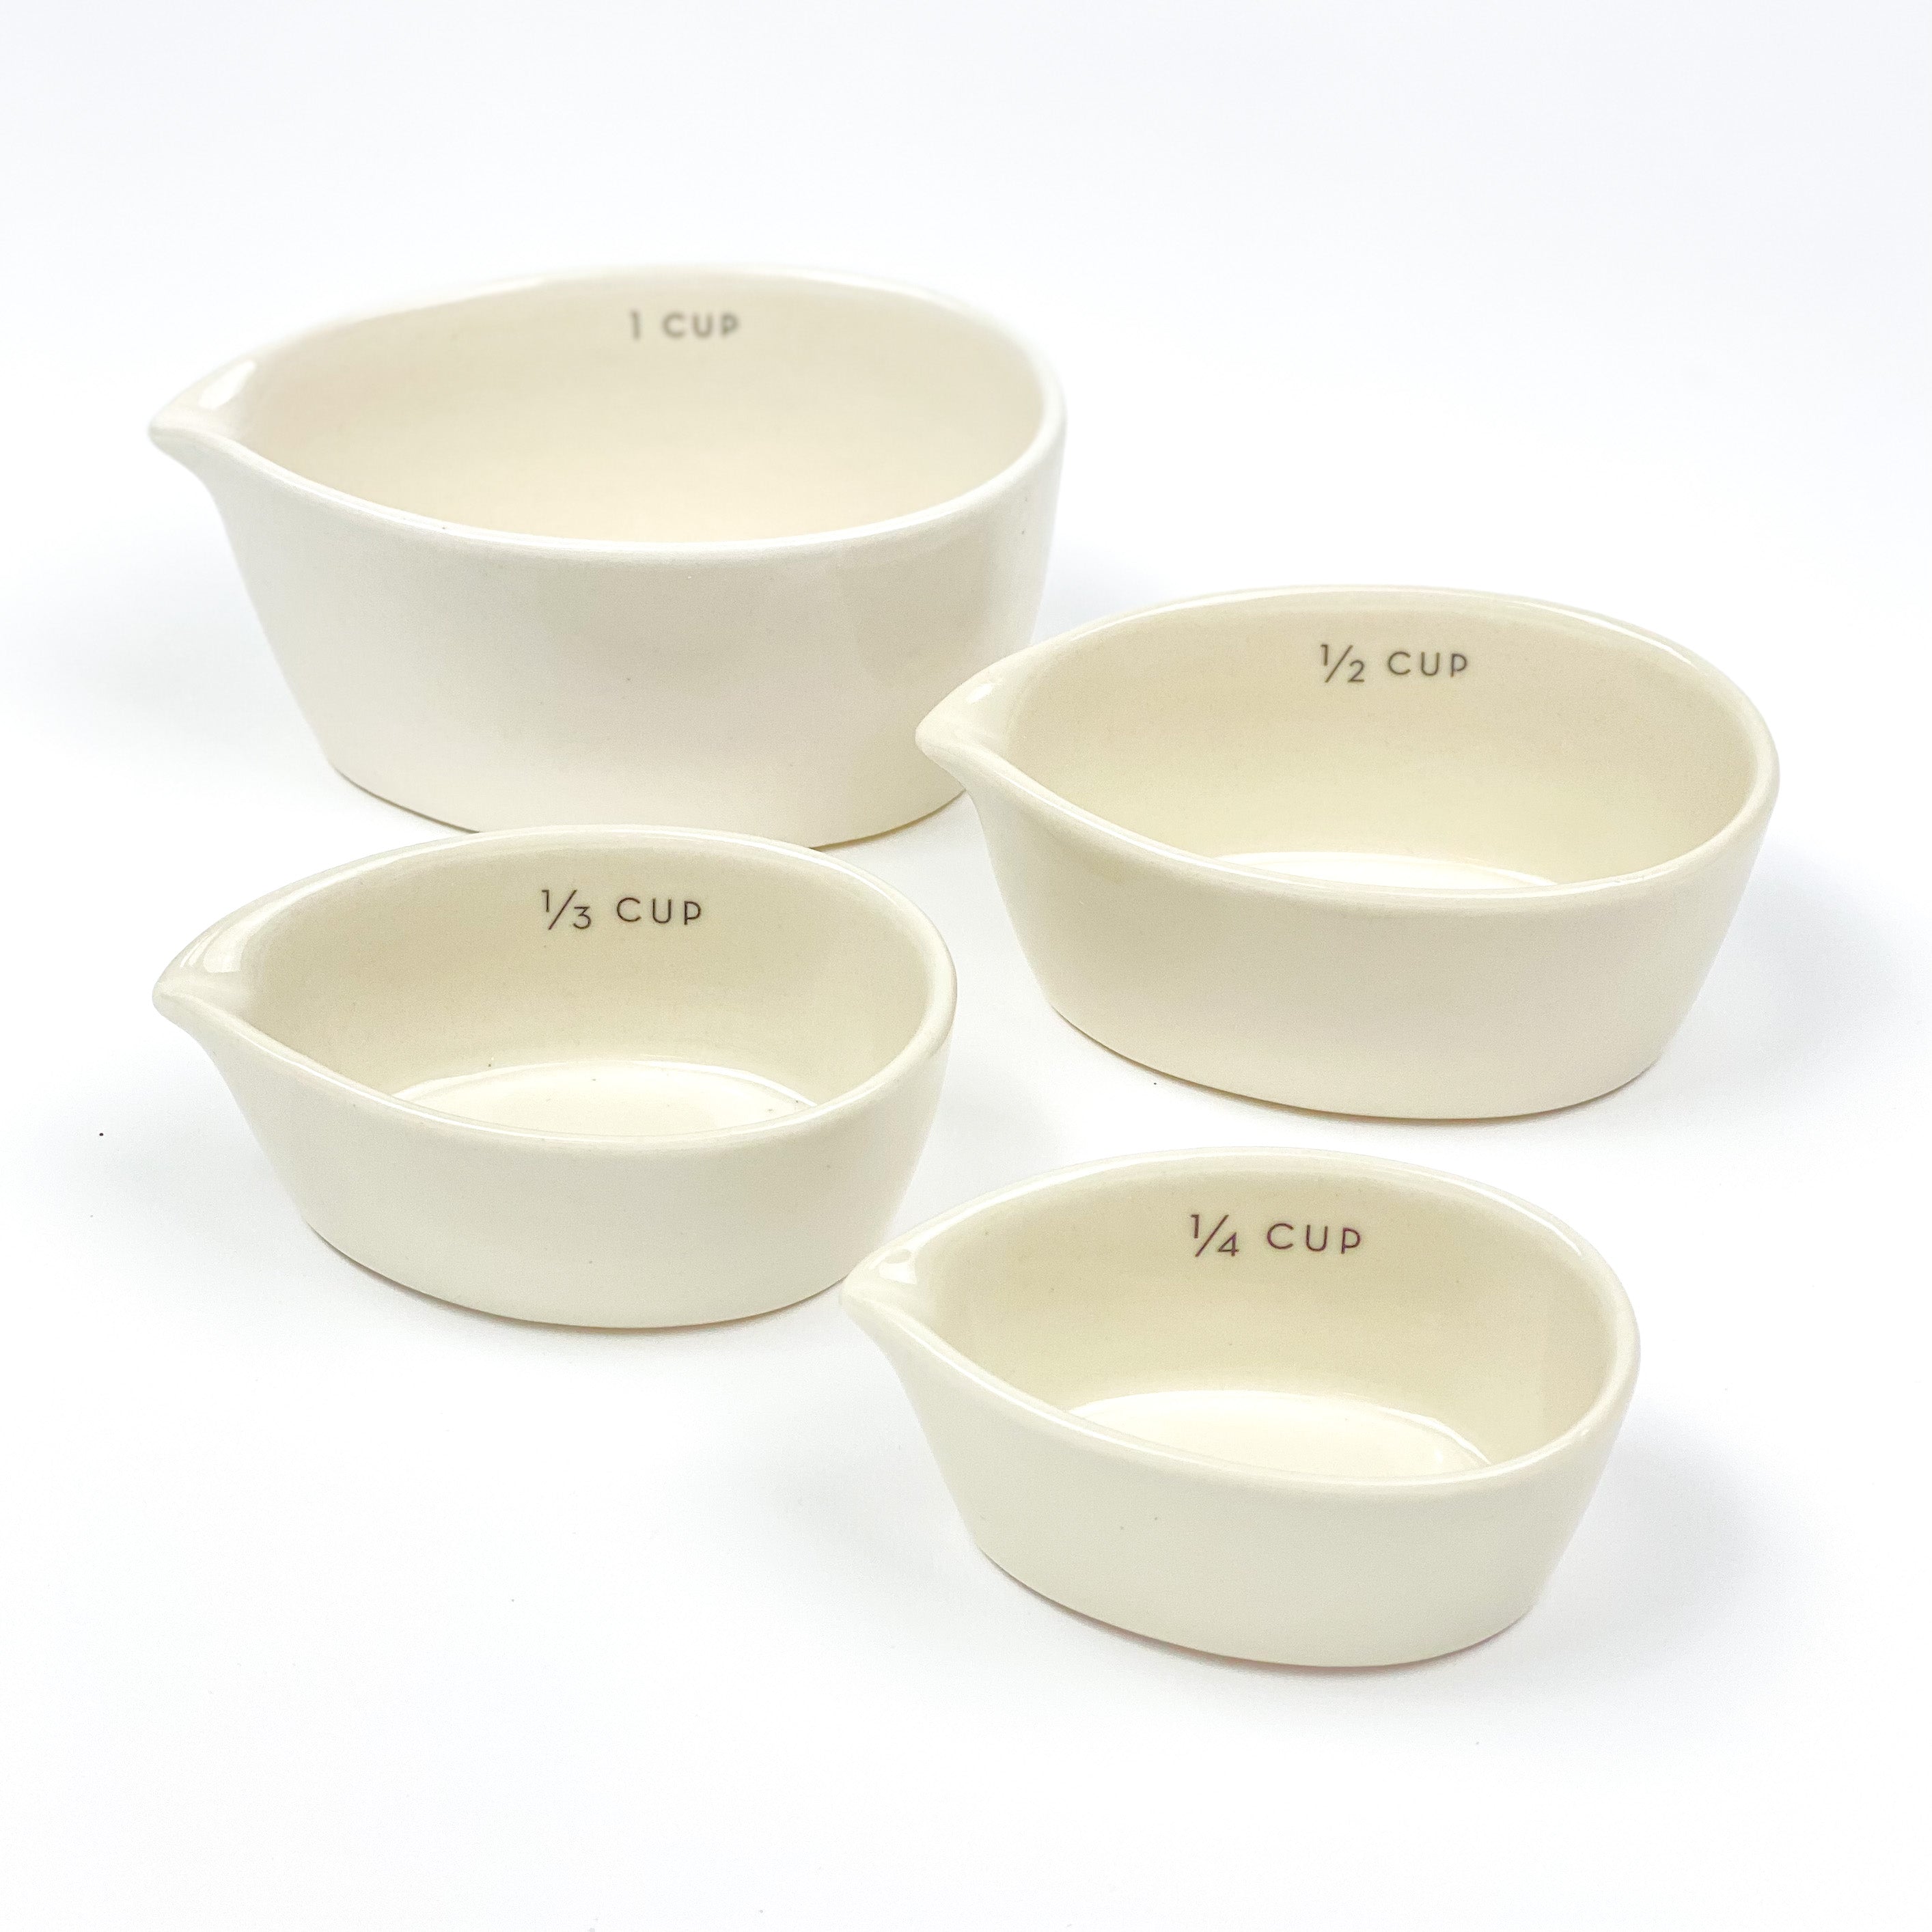 Navy & Gold Nesting Measuring Cups with Snap-On Ring, 4-Count - Wilton